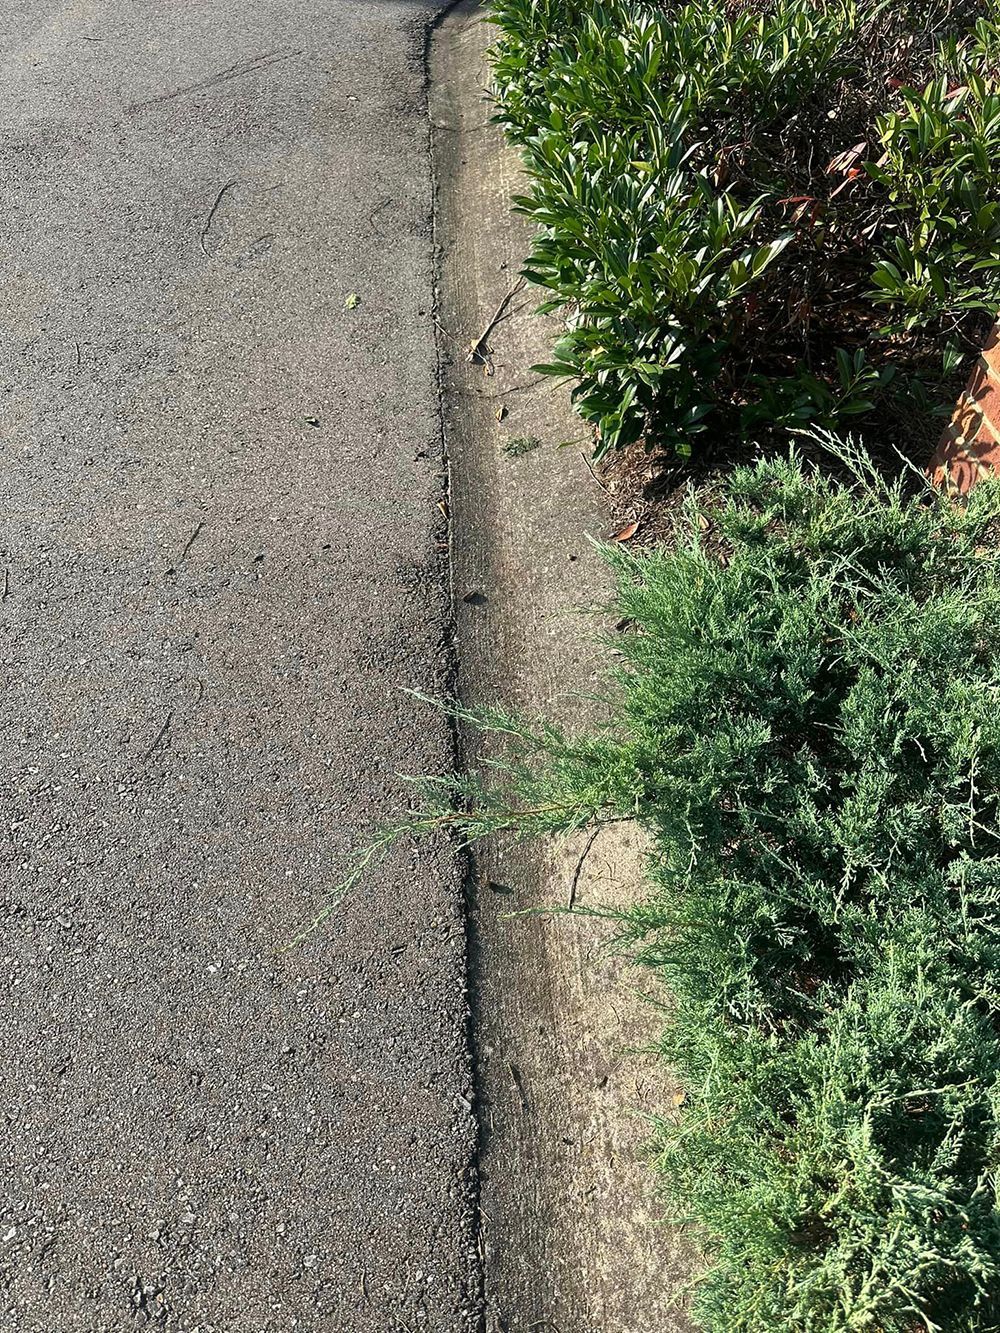 A close up of a road with a curb and bushes on the side of it